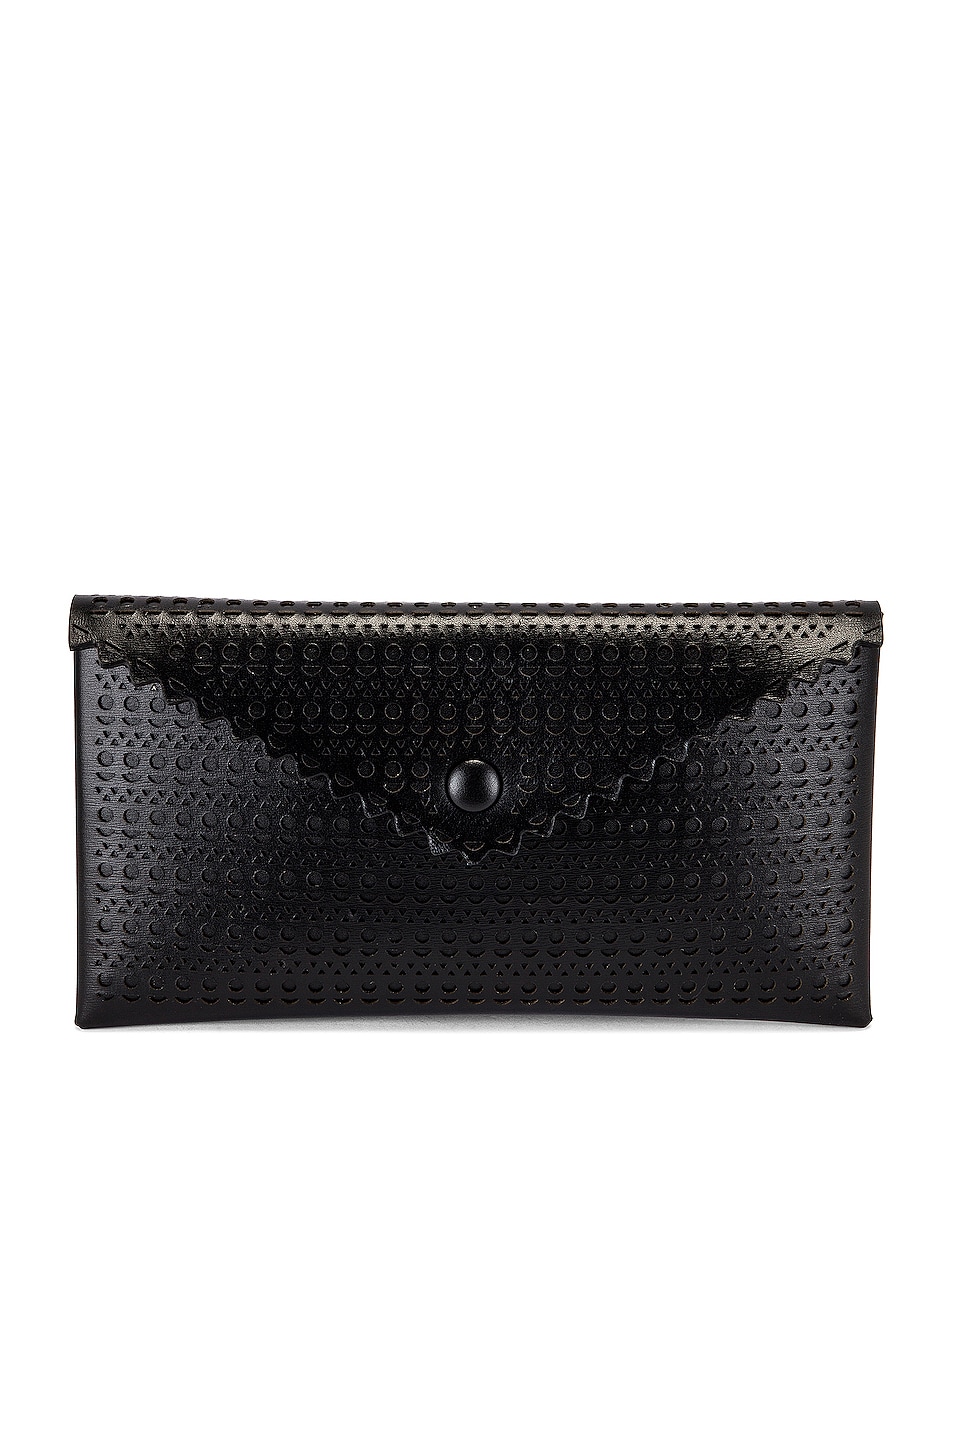 ALAÏA Louise 24 Leather Perforated Clutch in Black